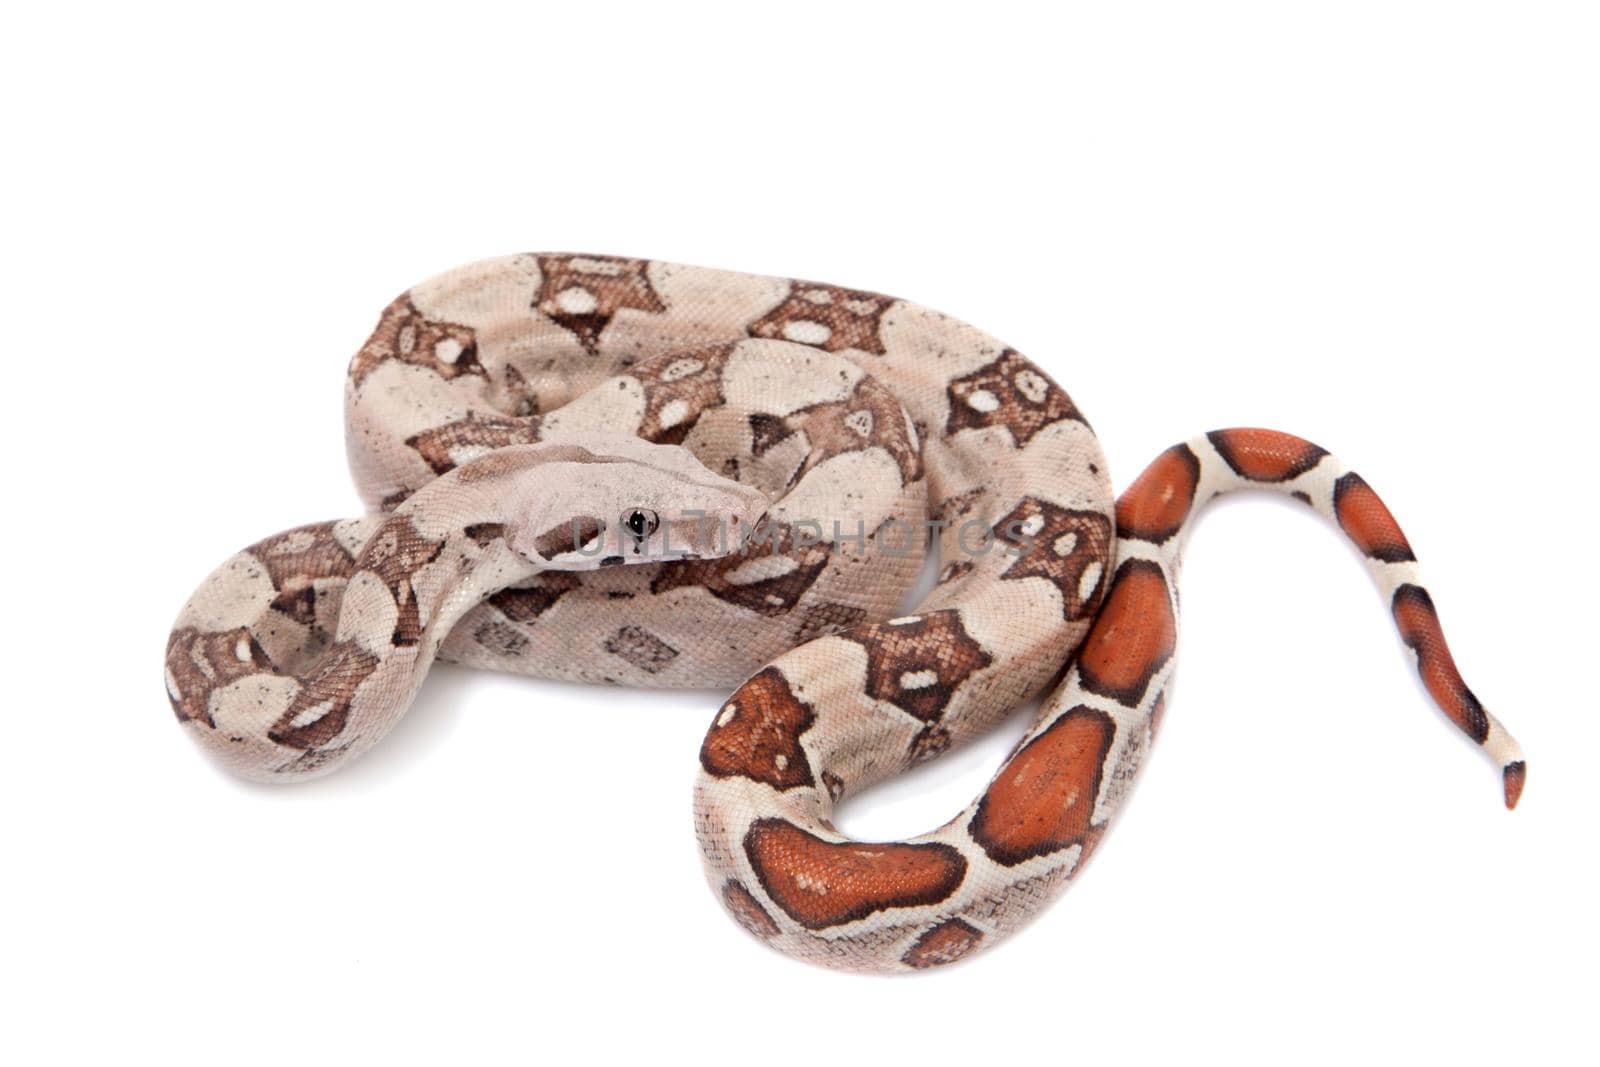 The common boa on white background by RosaJay